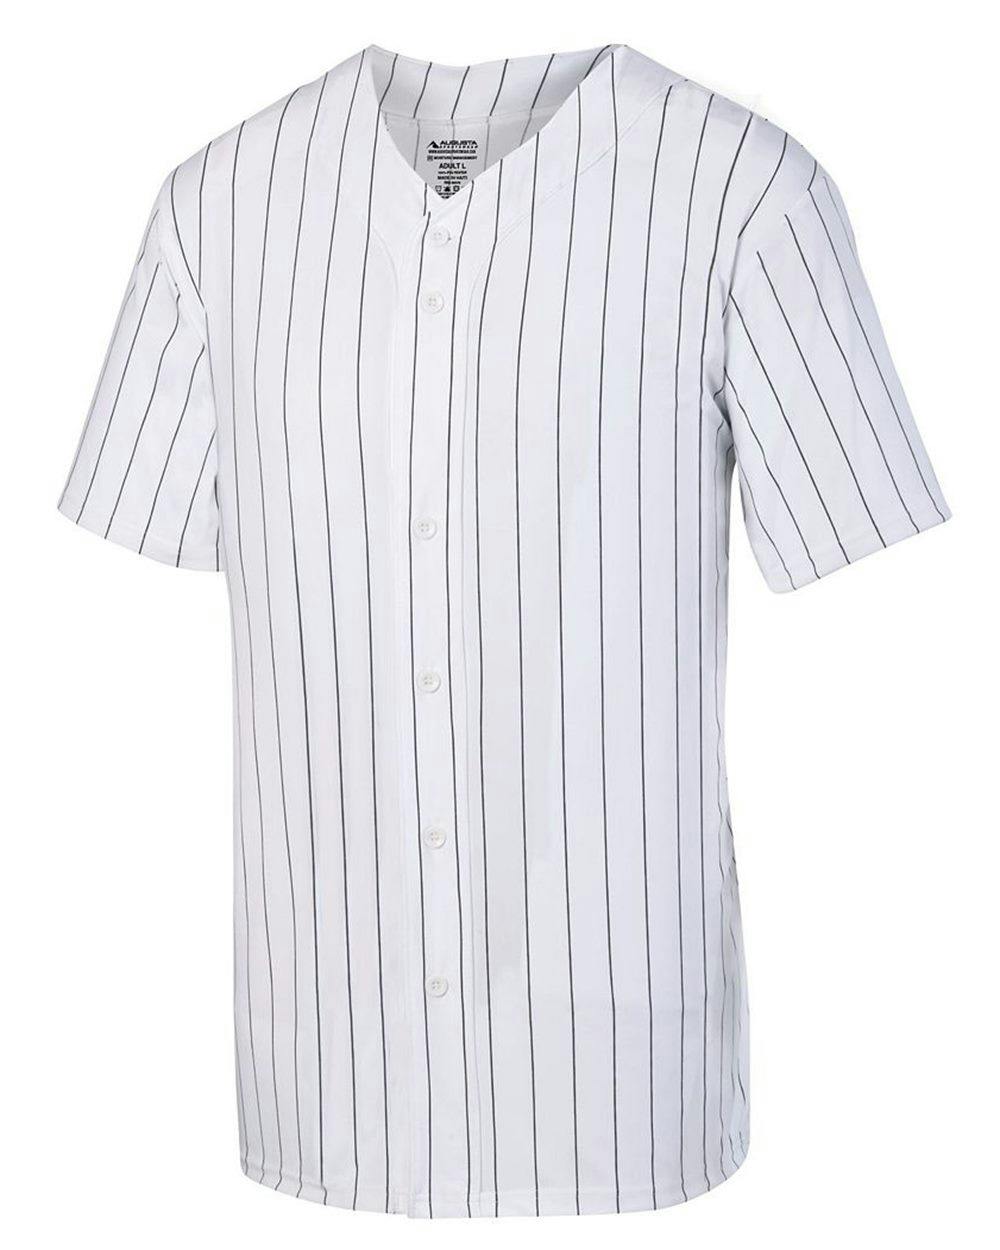 Image for Pinstripe Full Button Baseball Jersey - 1685